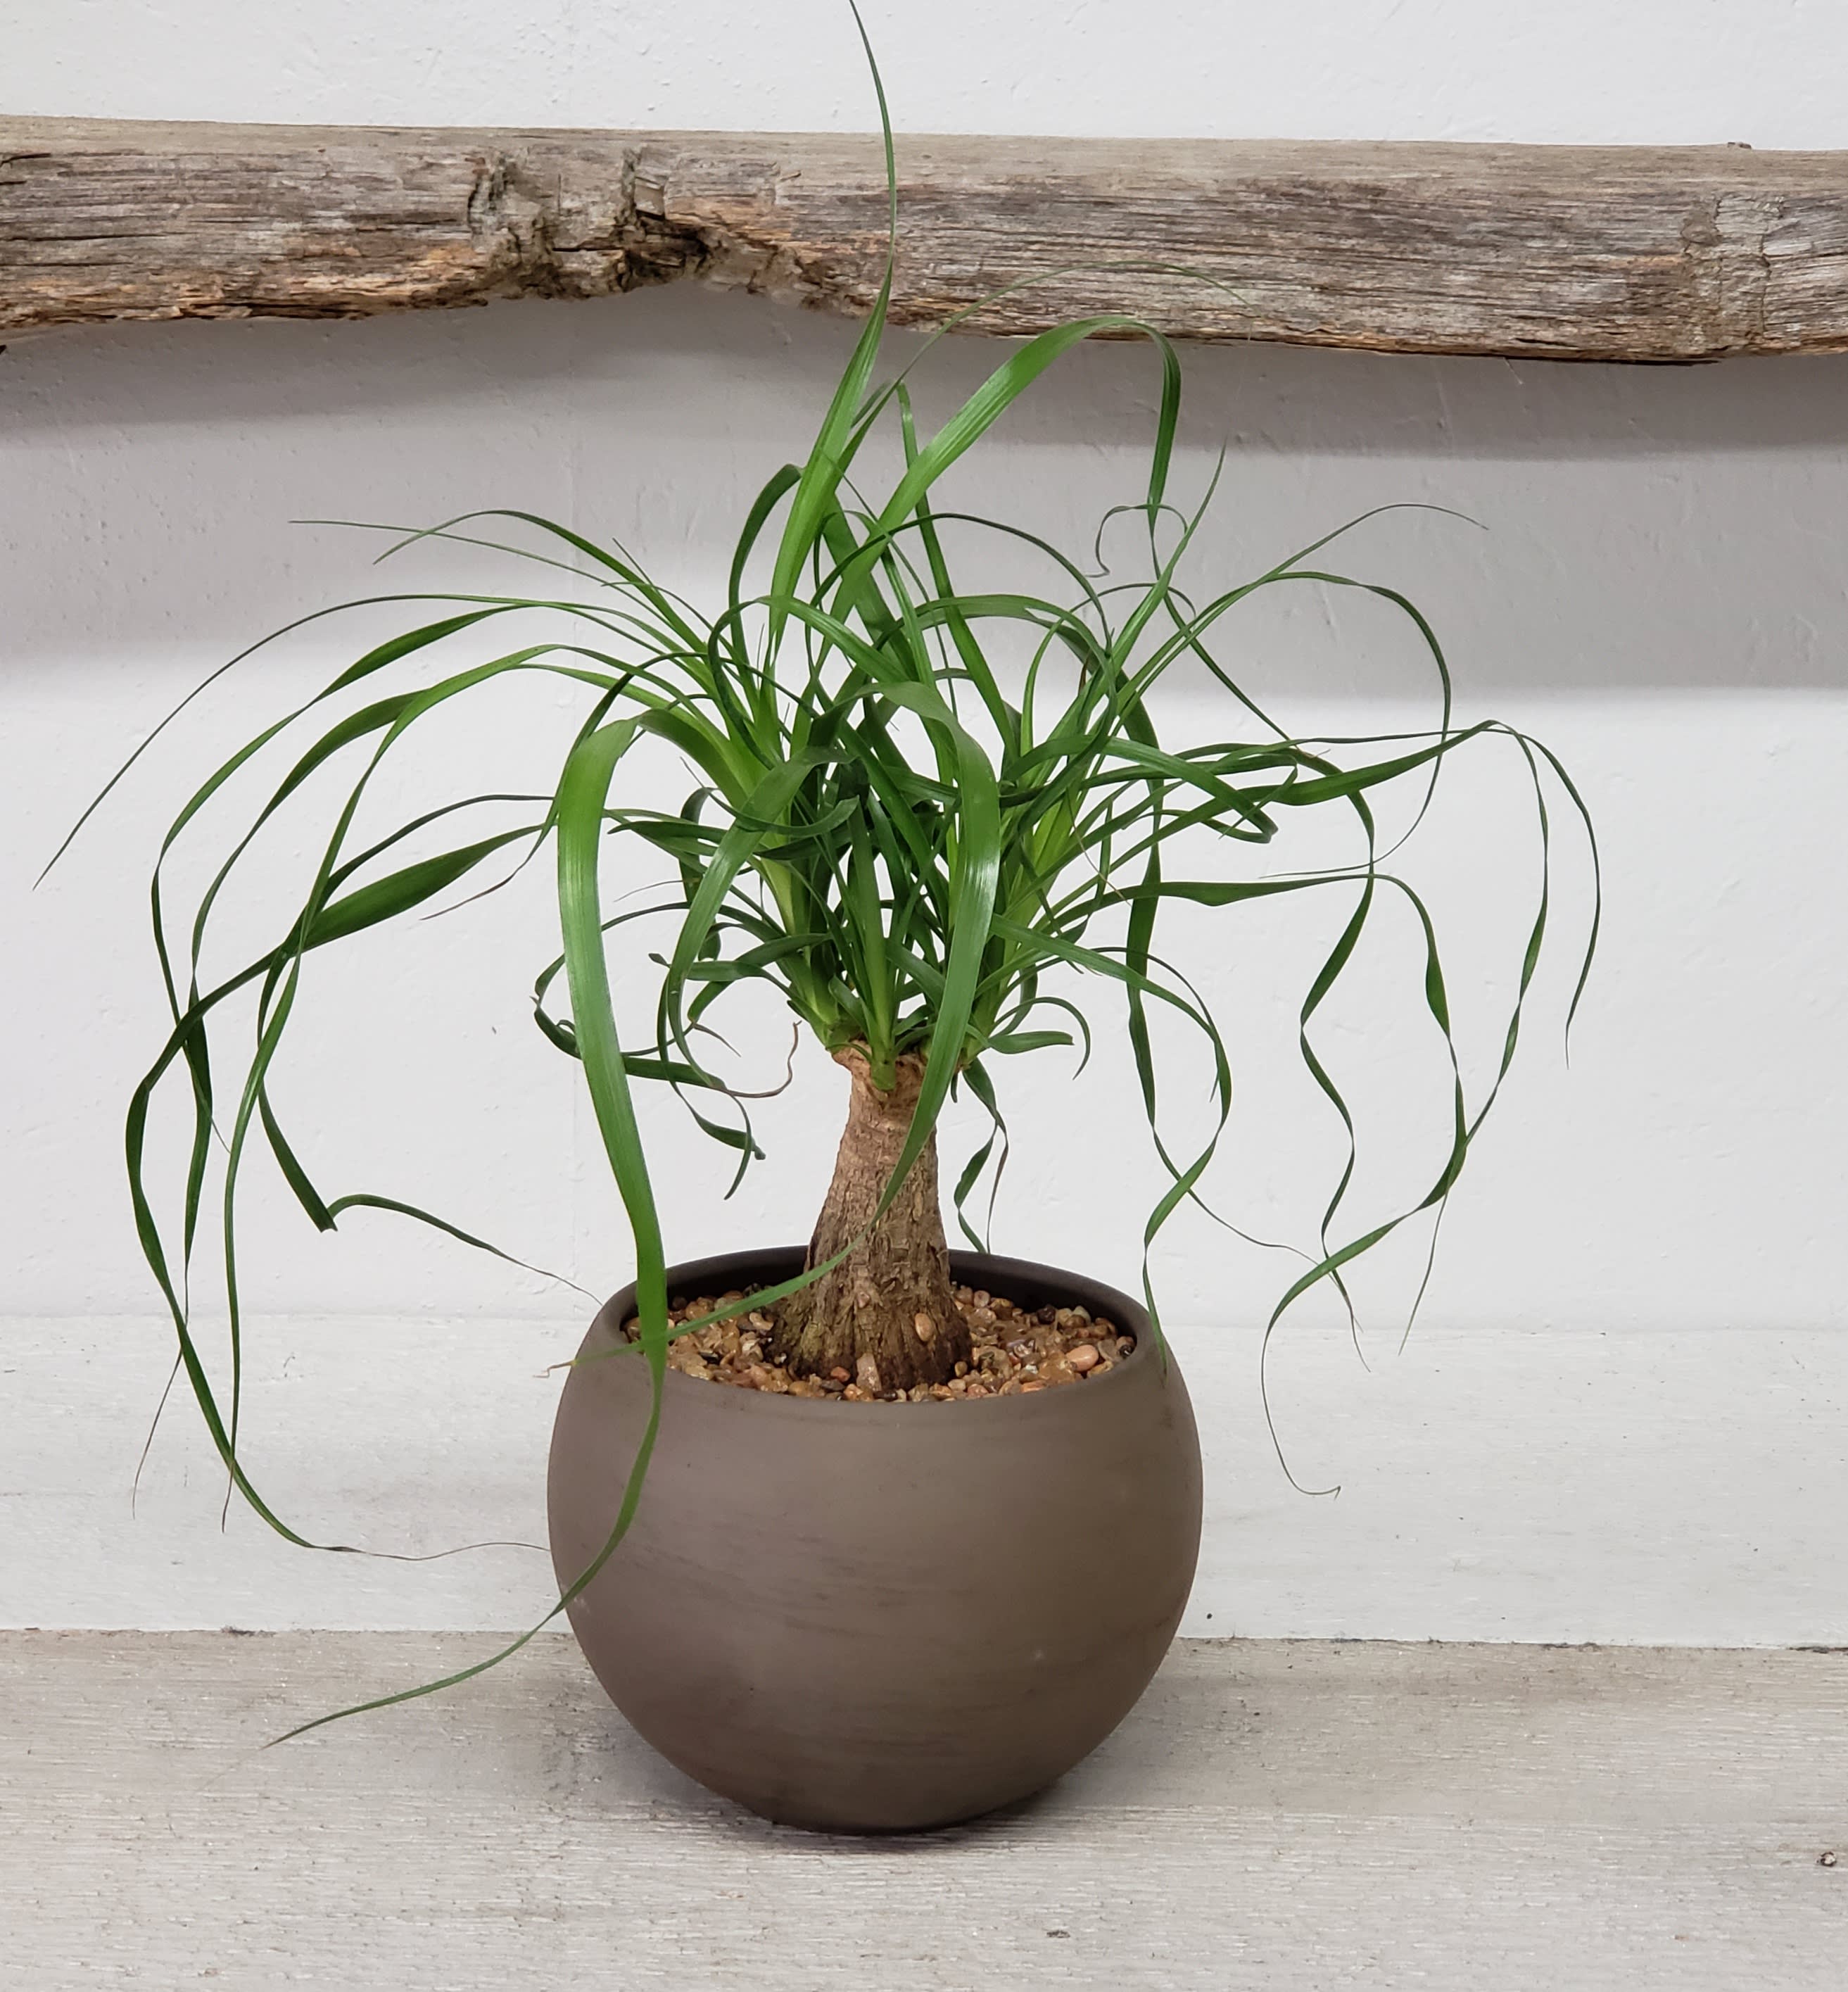 Ponytail Palm - A ponytail palm planted in a luna bowl. Approximately 15inches tall.